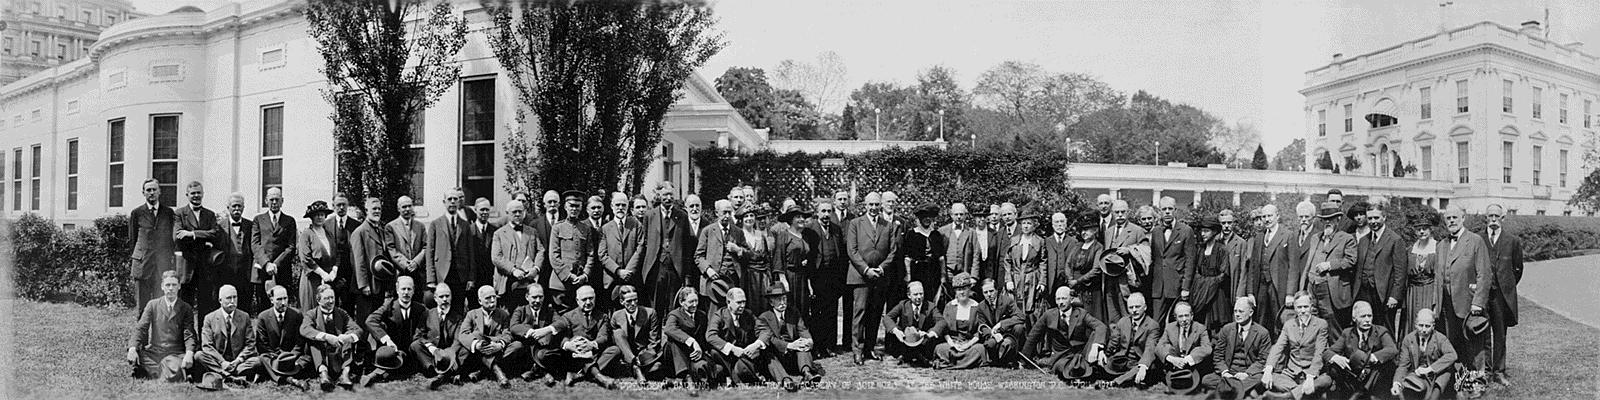 "President Harding and the National Academy of Sciences at the White House, Washington, DC, April 1921"